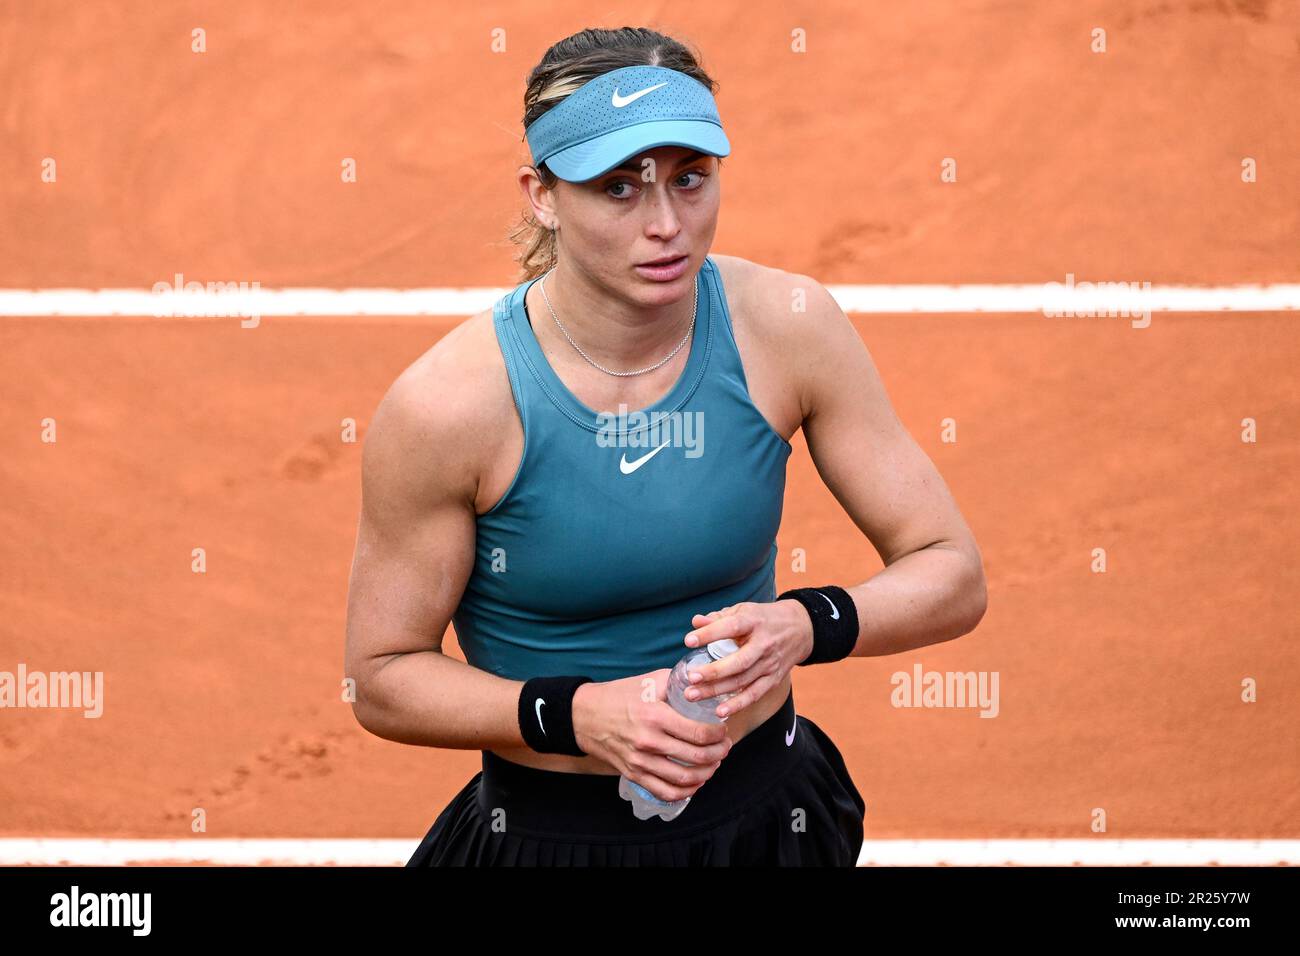 Rome, Italy. 17th May, 2023. Paula Badosa of Spain during her match against Jelena Ostapenko of Latvia at the Internazionali BNL d'Italia tennis tournament at Foro Italico in Rome, Italy on May 17th, 2023. Credit: Insidefoto di andrea staccioli/Alamy Live News Stock Photo